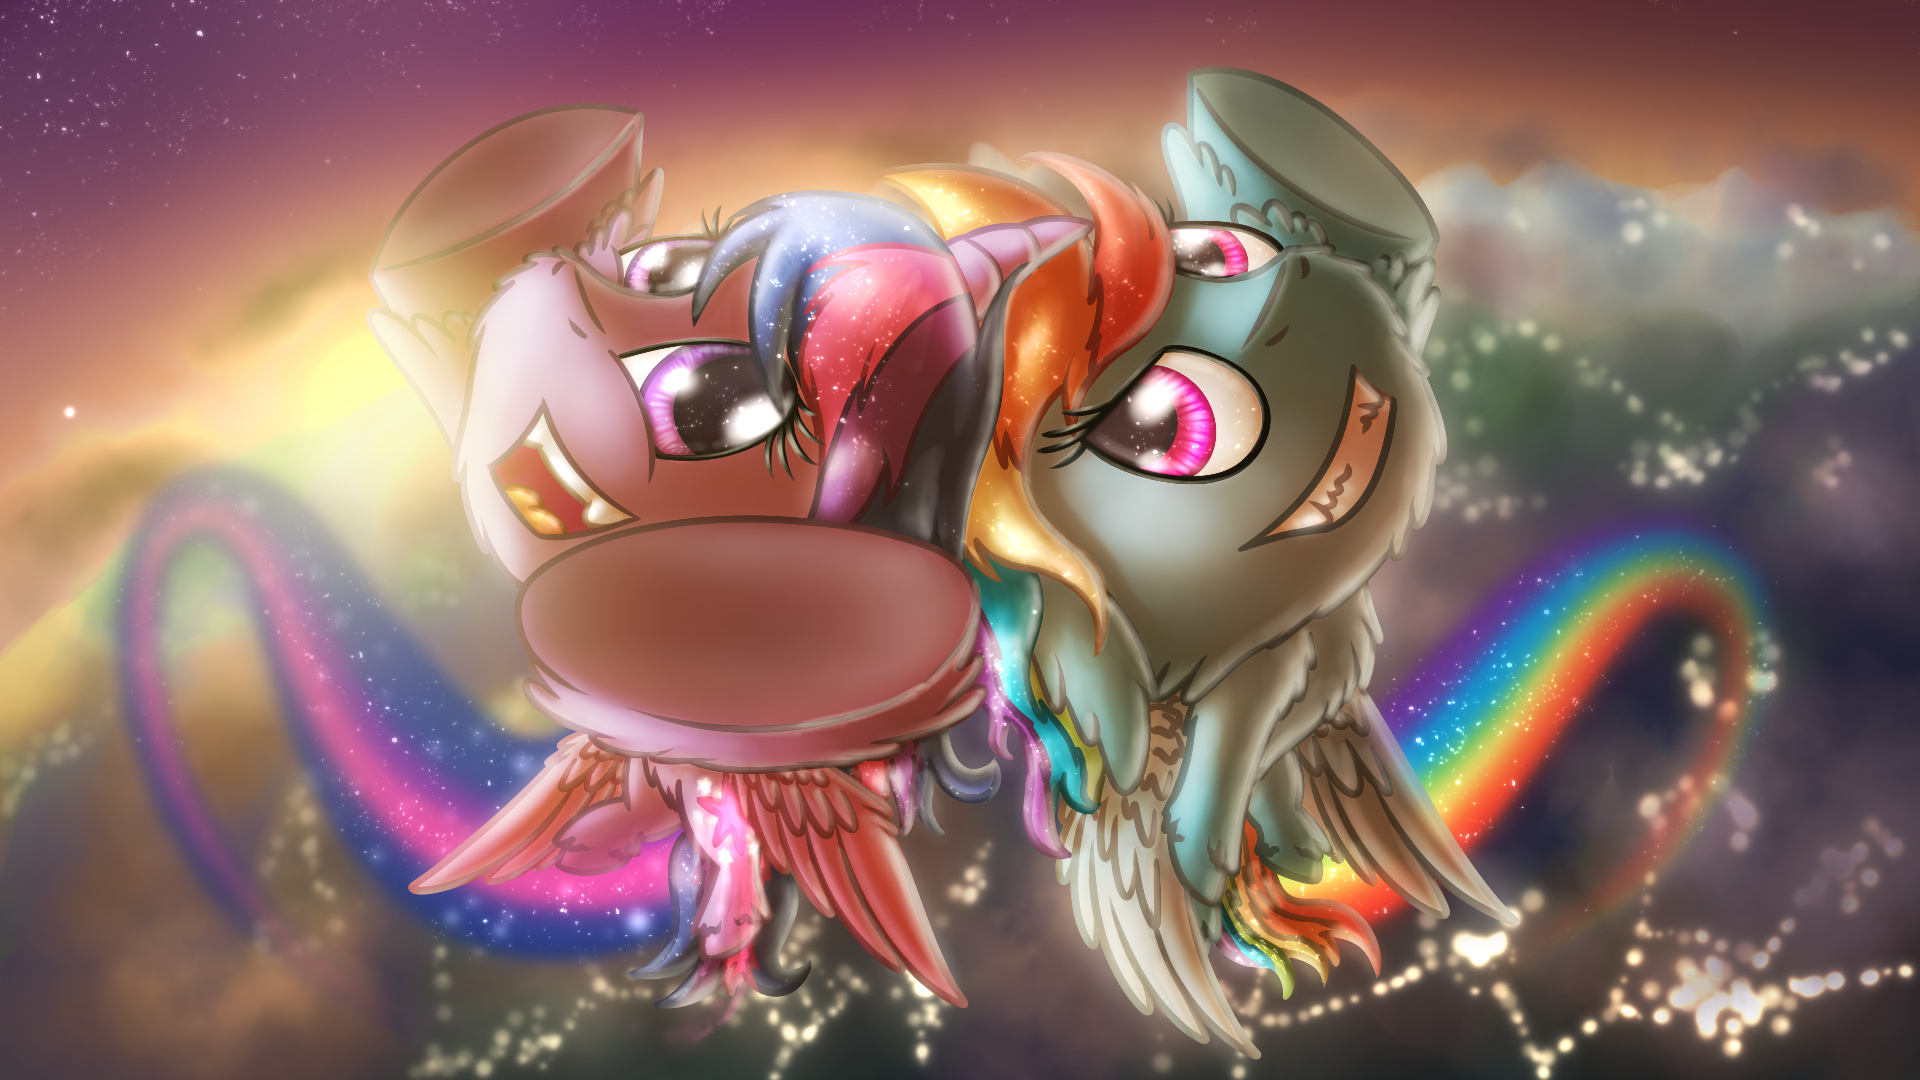 Together in The Skies [MLP]